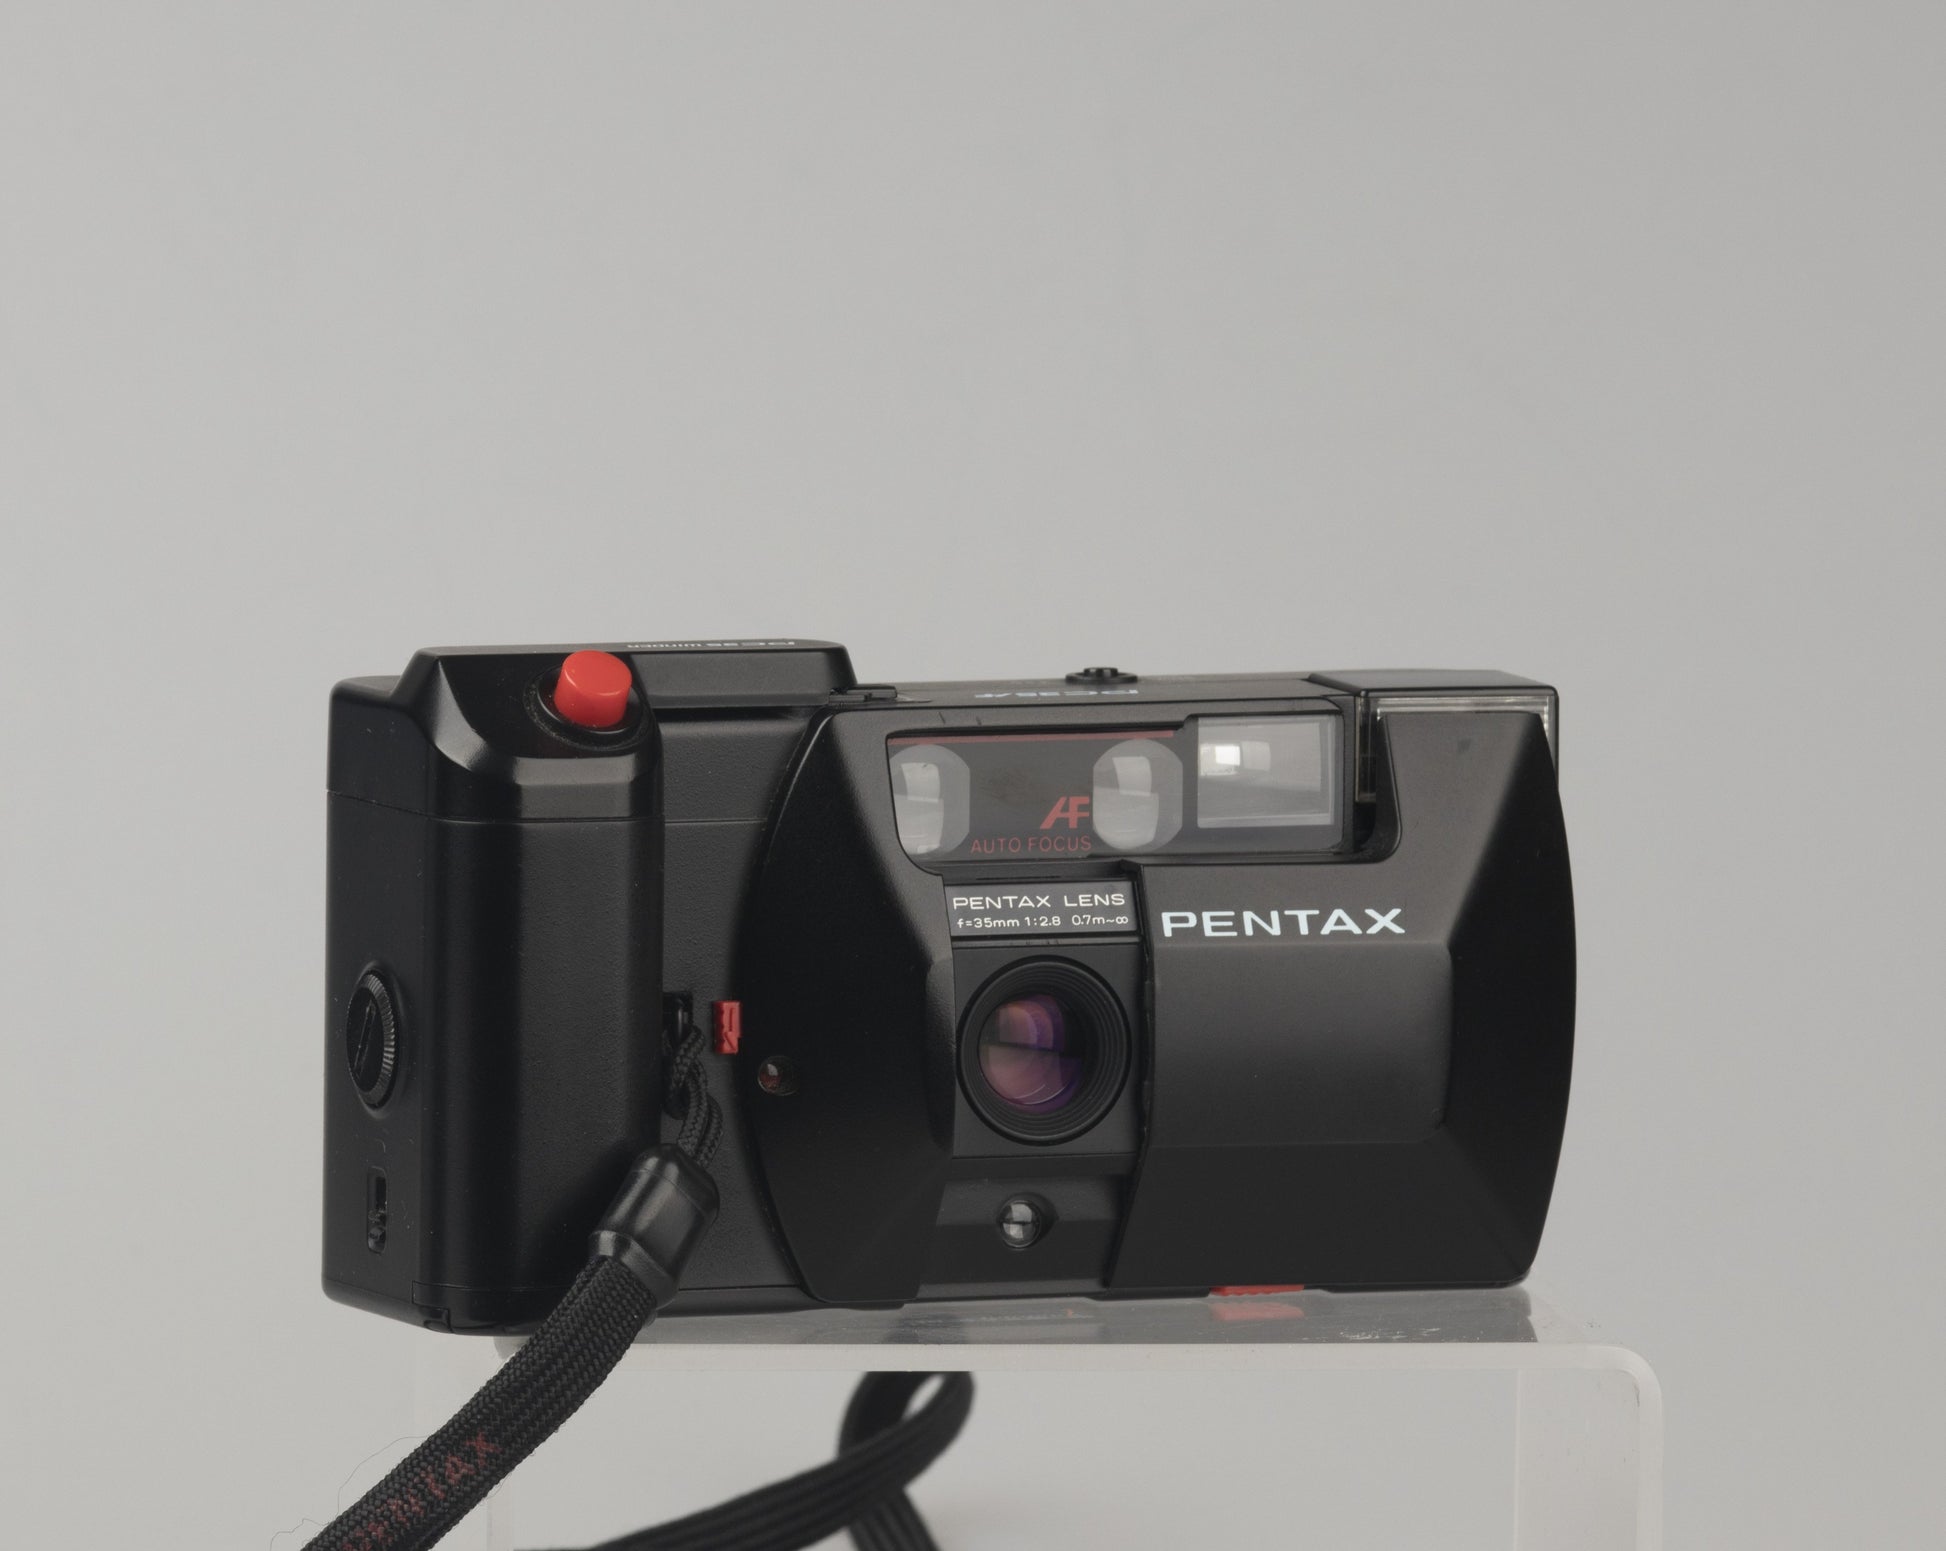 Pentax PC35AF 35mm camera with the PC35 Winder accessory